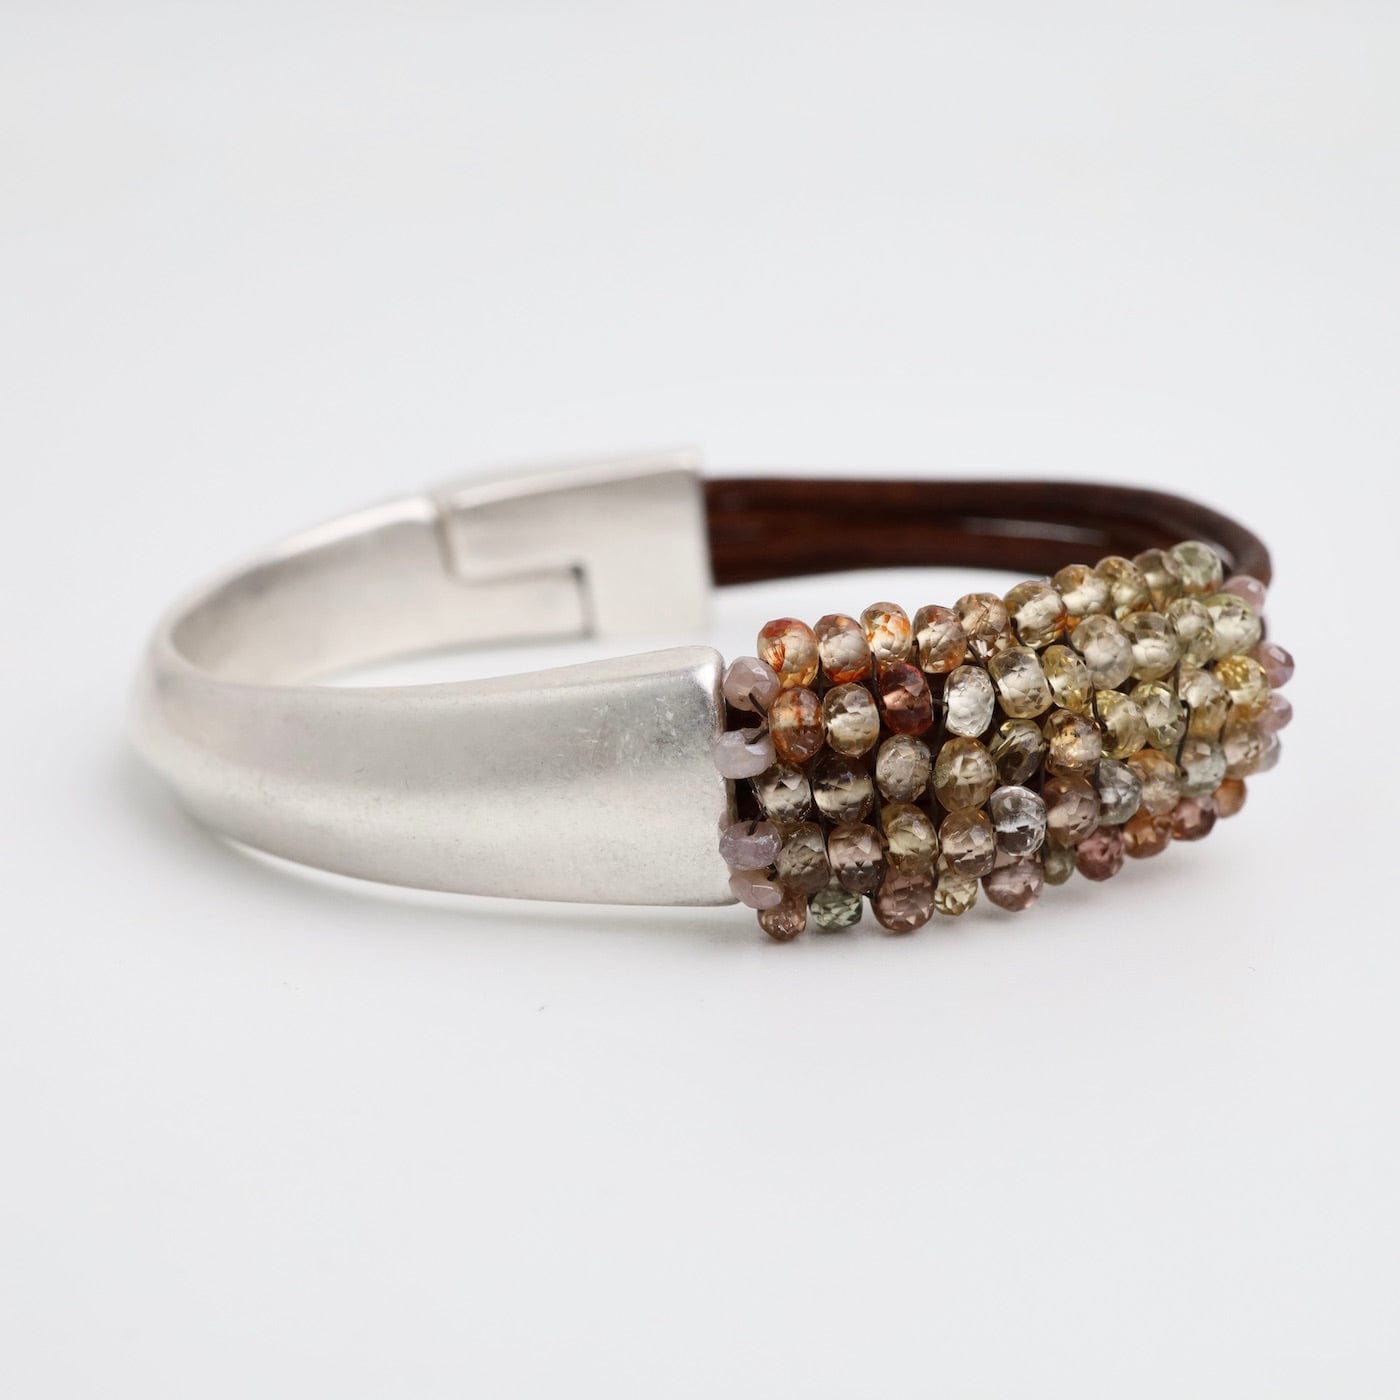 Load image into Gallery viewer, BRC-JM Hand Stitched Multi-Faceted Earth Tone Zircon Half Cuff Bracelet
